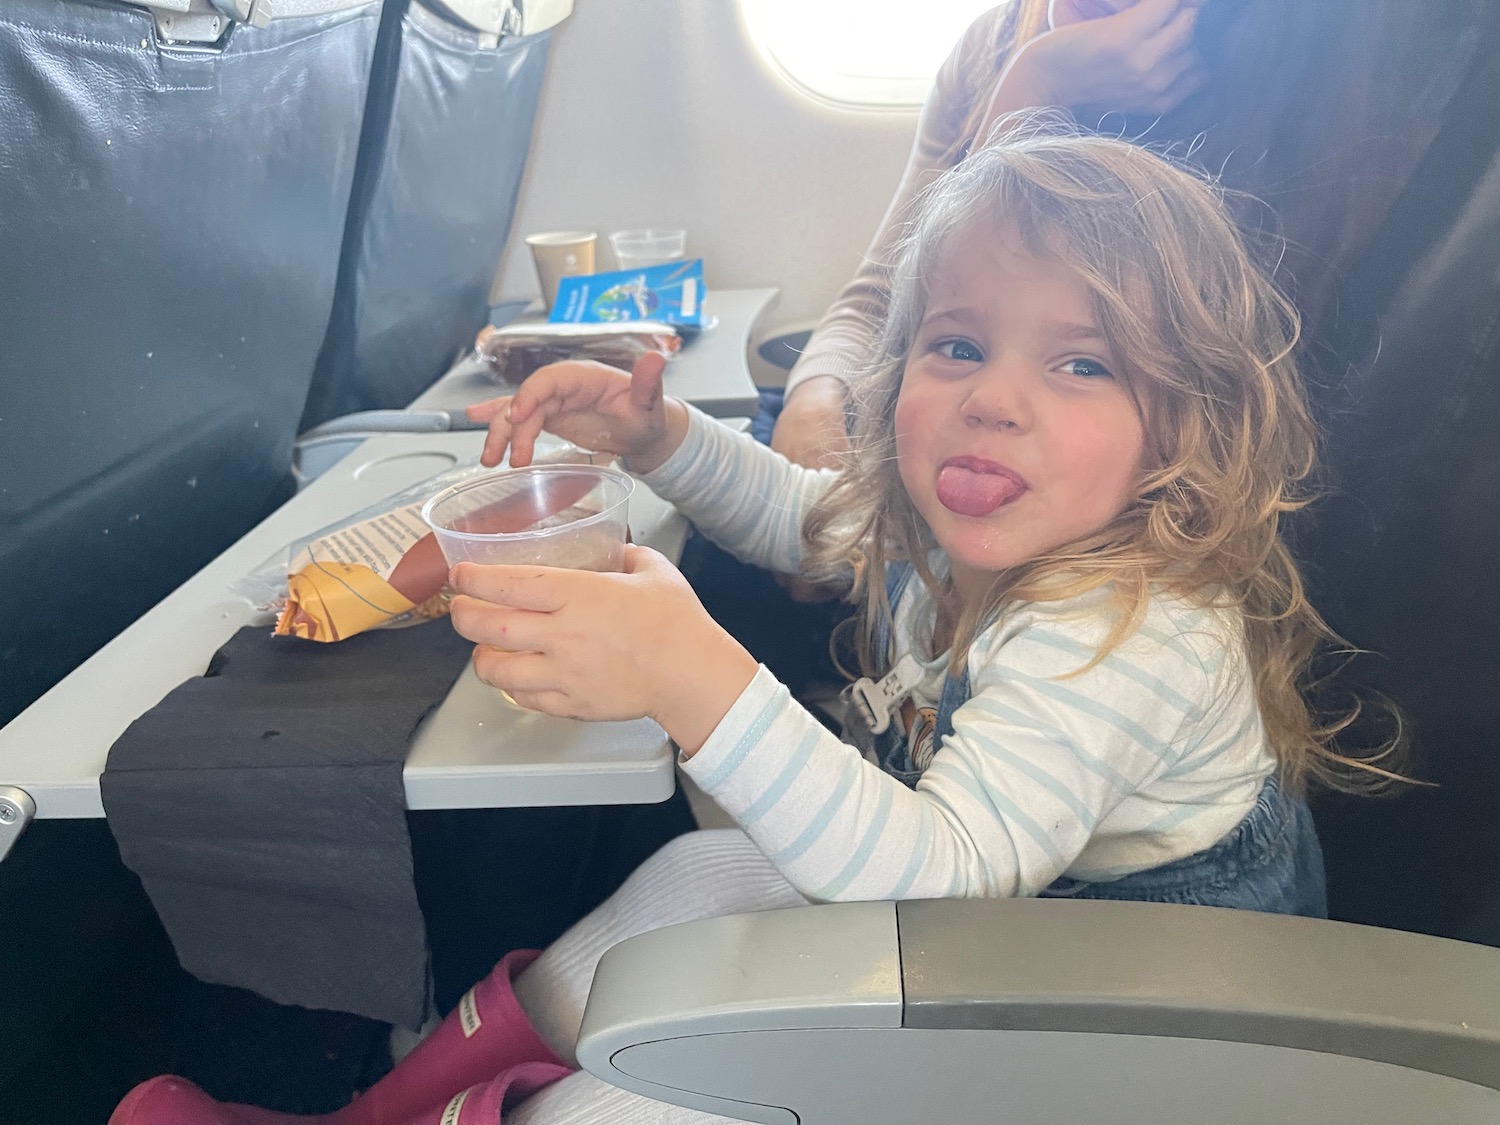 a child sitting in an airplane with her tongue out